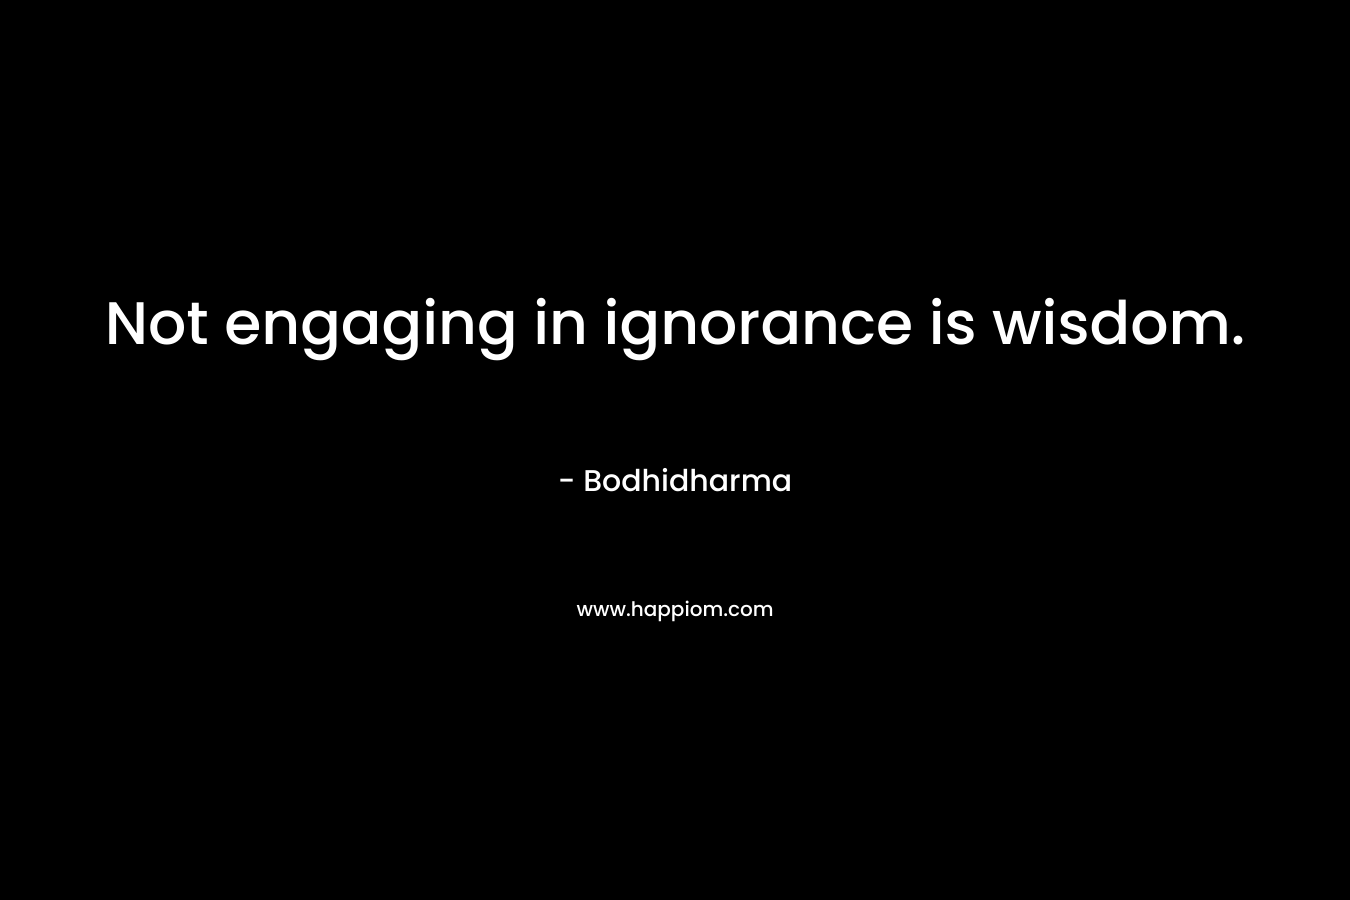 Not engaging in ignorance is wisdom. – Bodhidharma